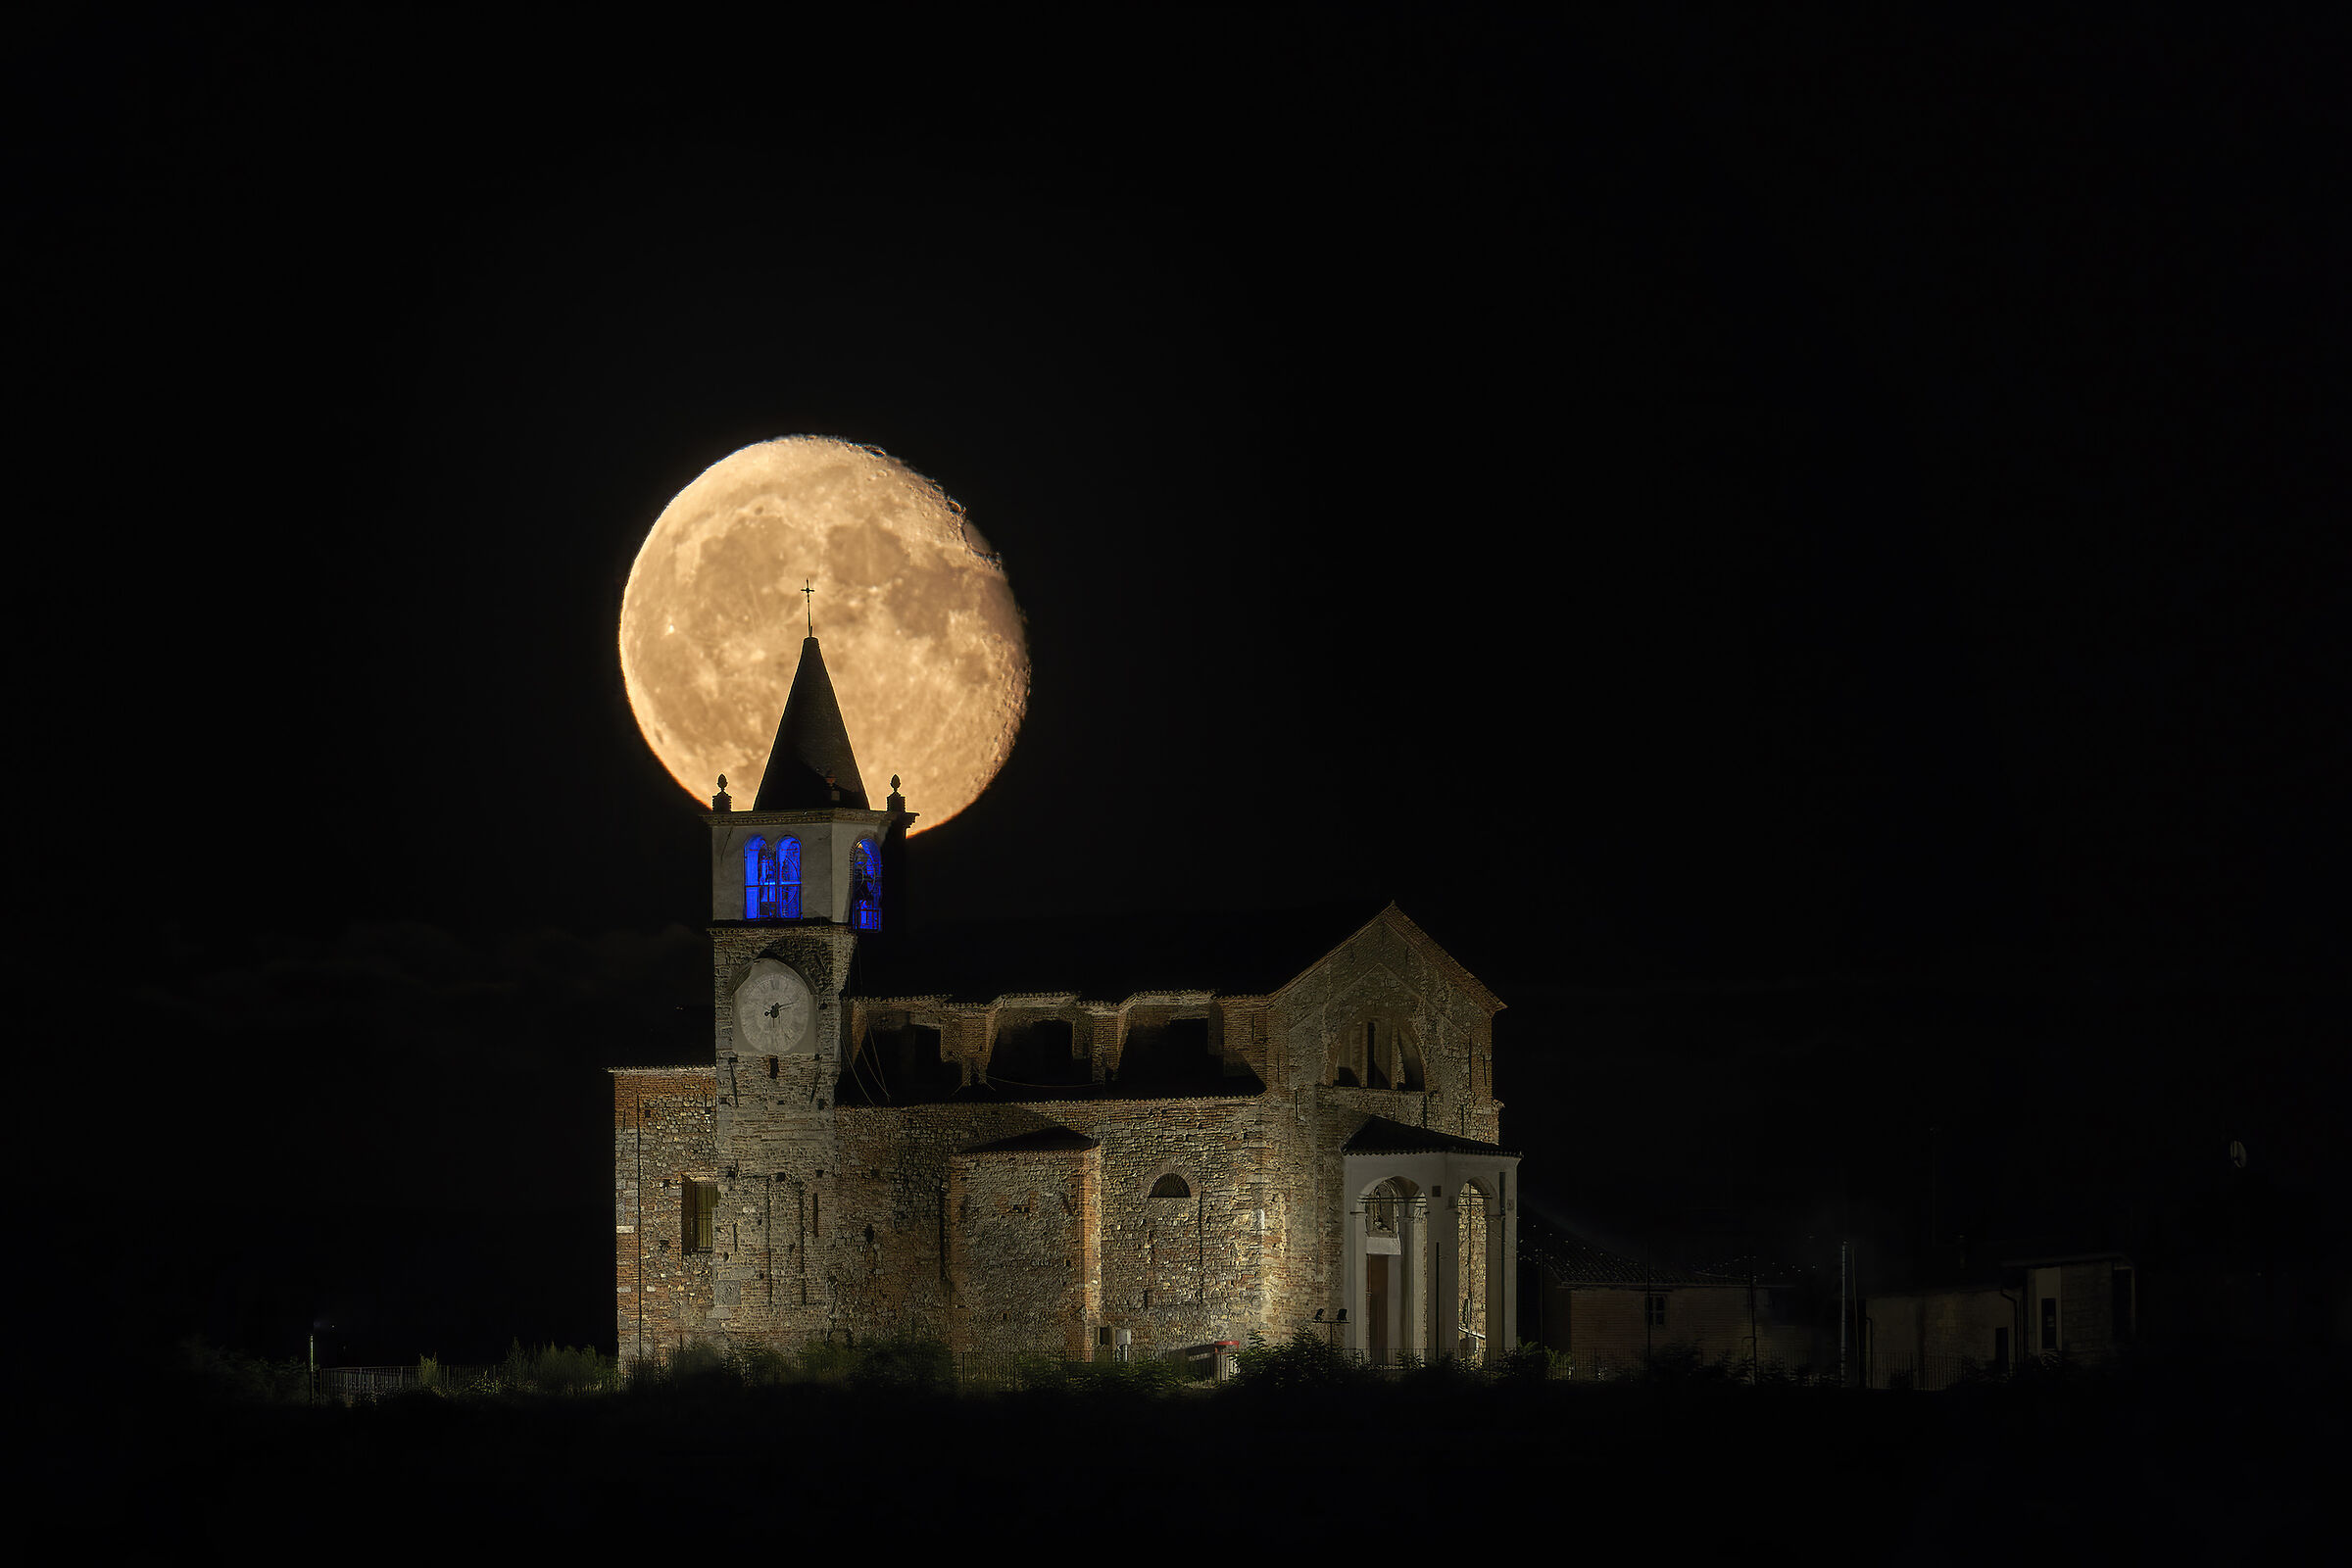 The moon rises behind the church of my village...